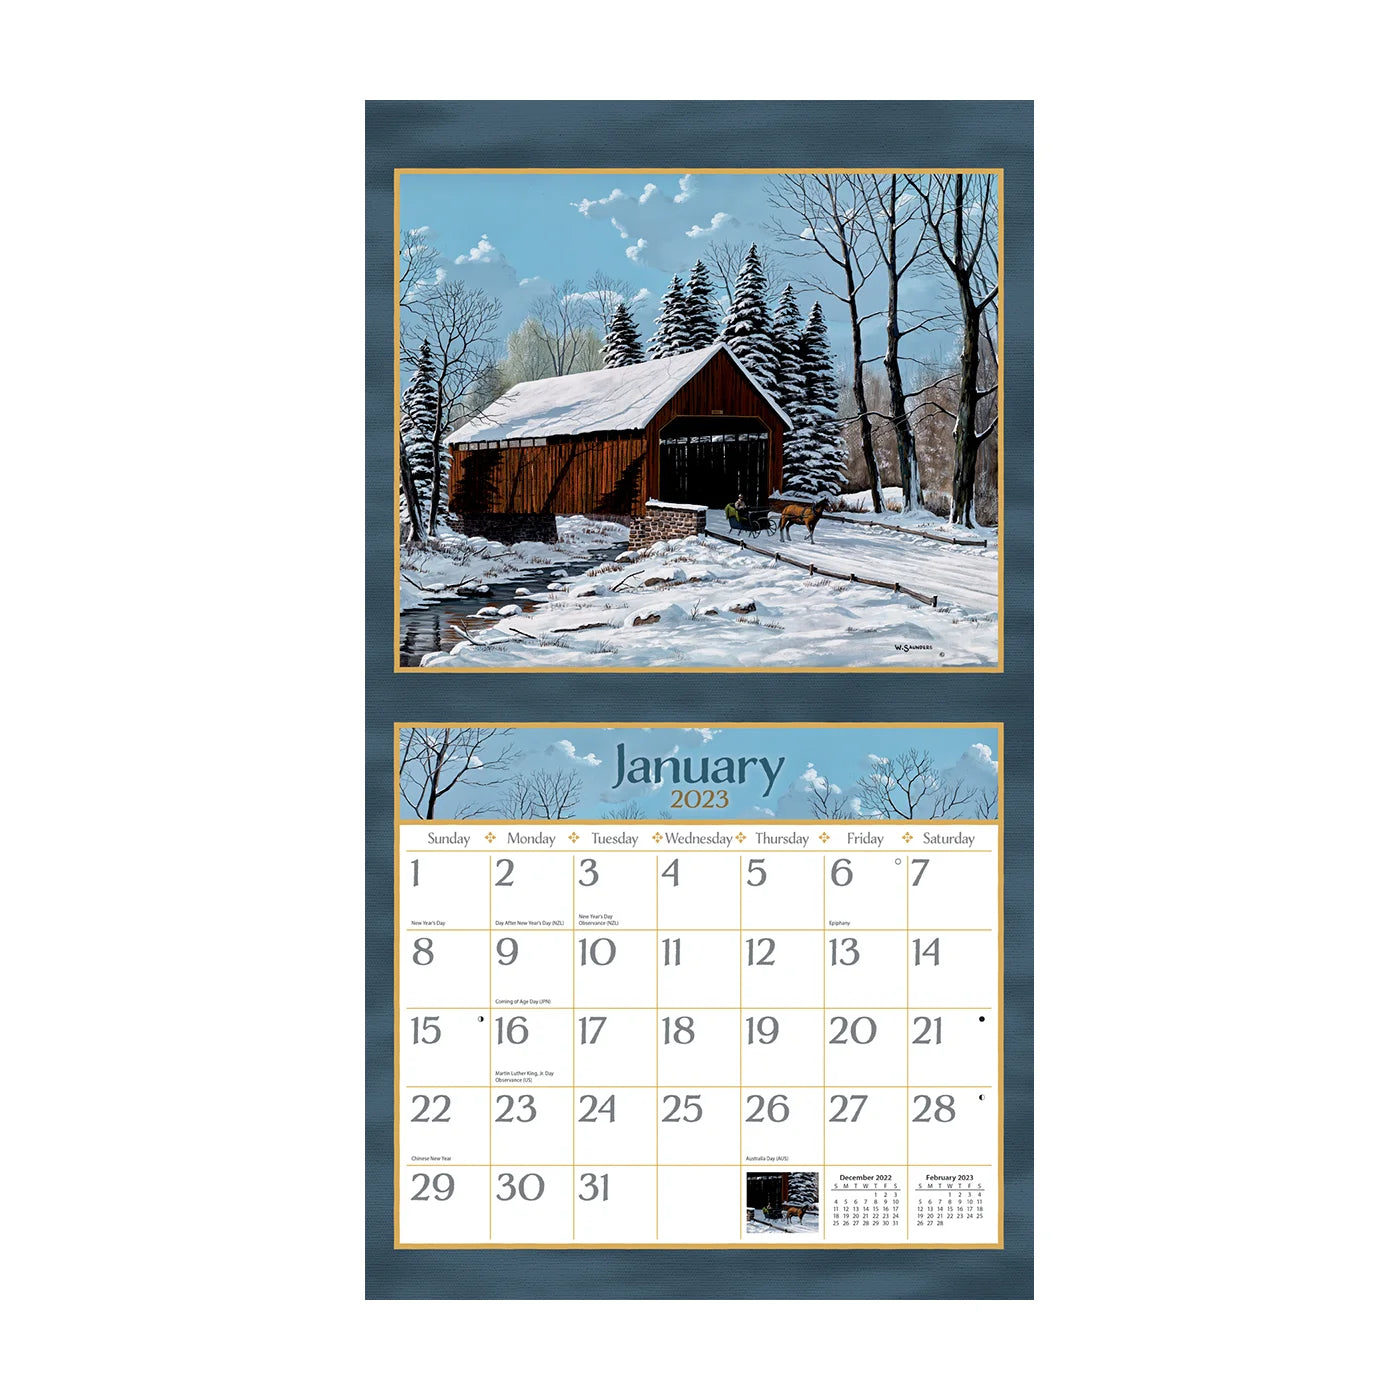 2023 LANG Road Home by Bill Saunders - Deluxe Wall Calendar